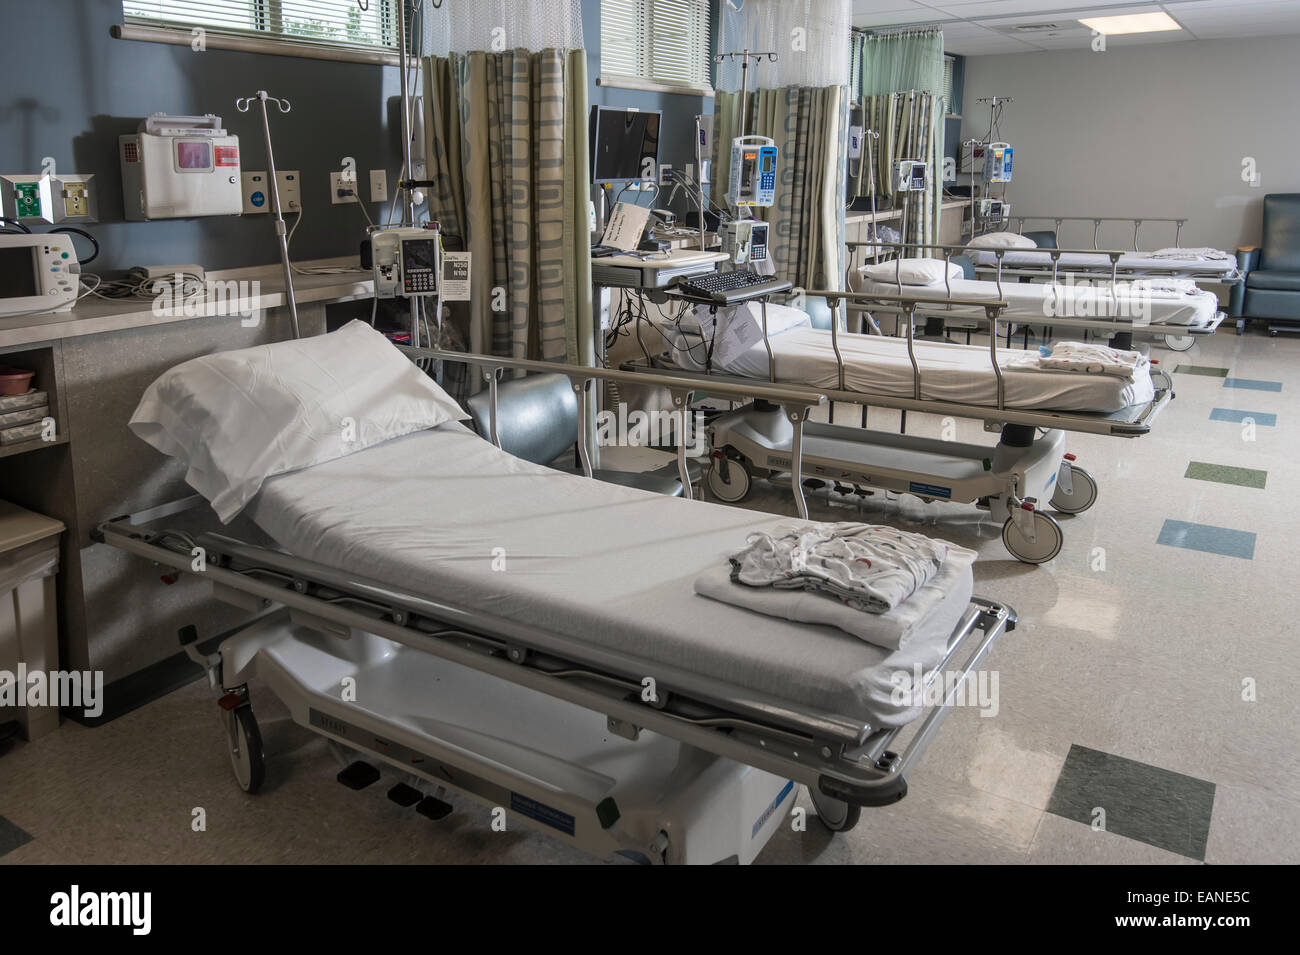 Multiple Beds In Hospital Recovery Room Stock Photo